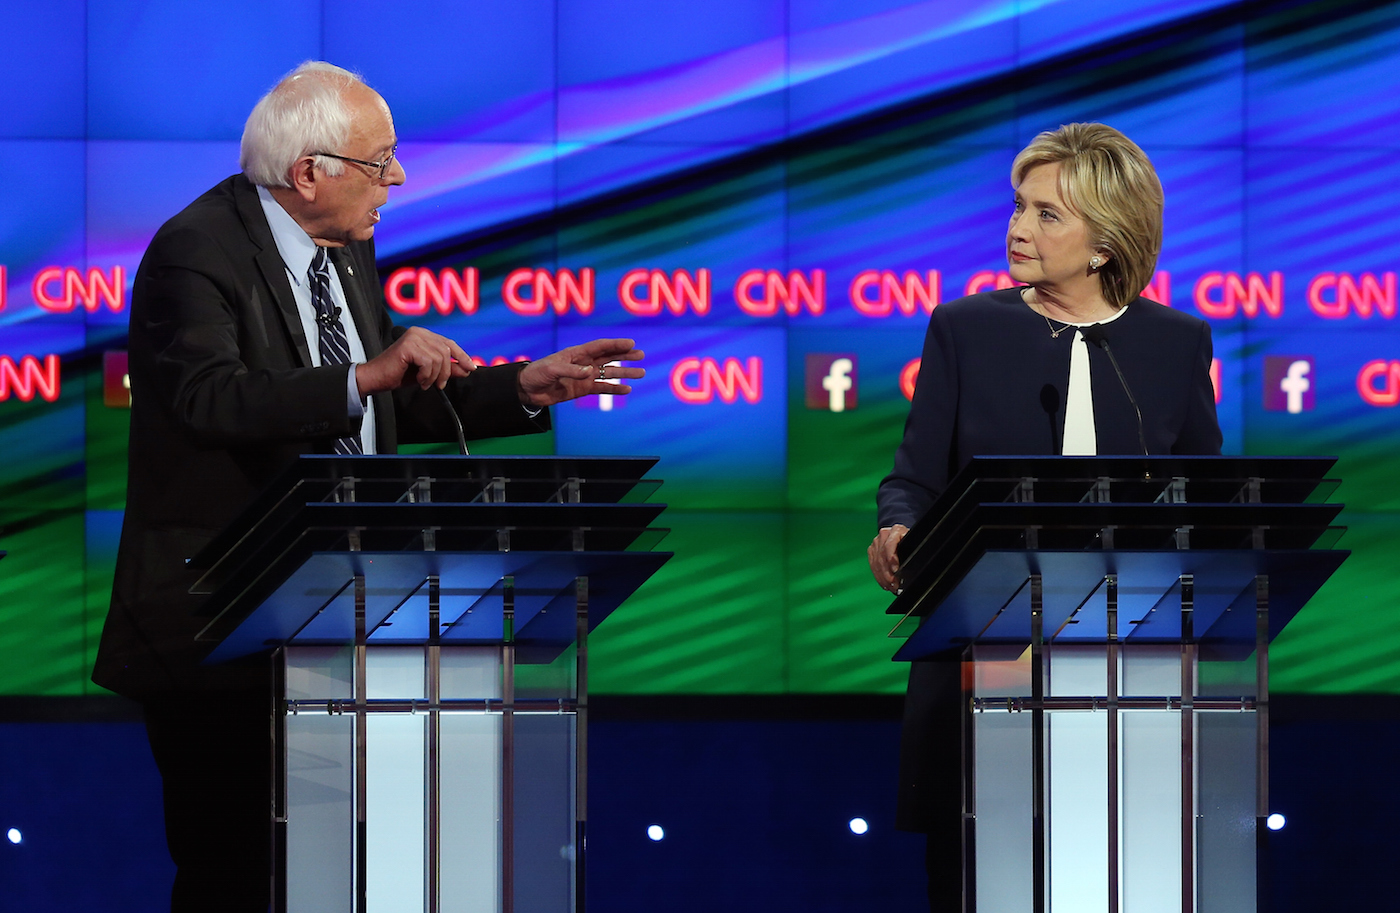 LAS VEGAS, NV - OCTOBER 13: Democratic presidential candidates Sen. Bernie Sanders (I-VT) (L) and Hillary Clinton take part in a presidential debate sponsored by CNN and Facebook at Wynn Las Vegas on October 13, 2015 in Las Vegas, Nevada. Five Democratic presidential candidates are participating in the party's first presidential debate. (Photo by Joe Raedle/Getty Images)